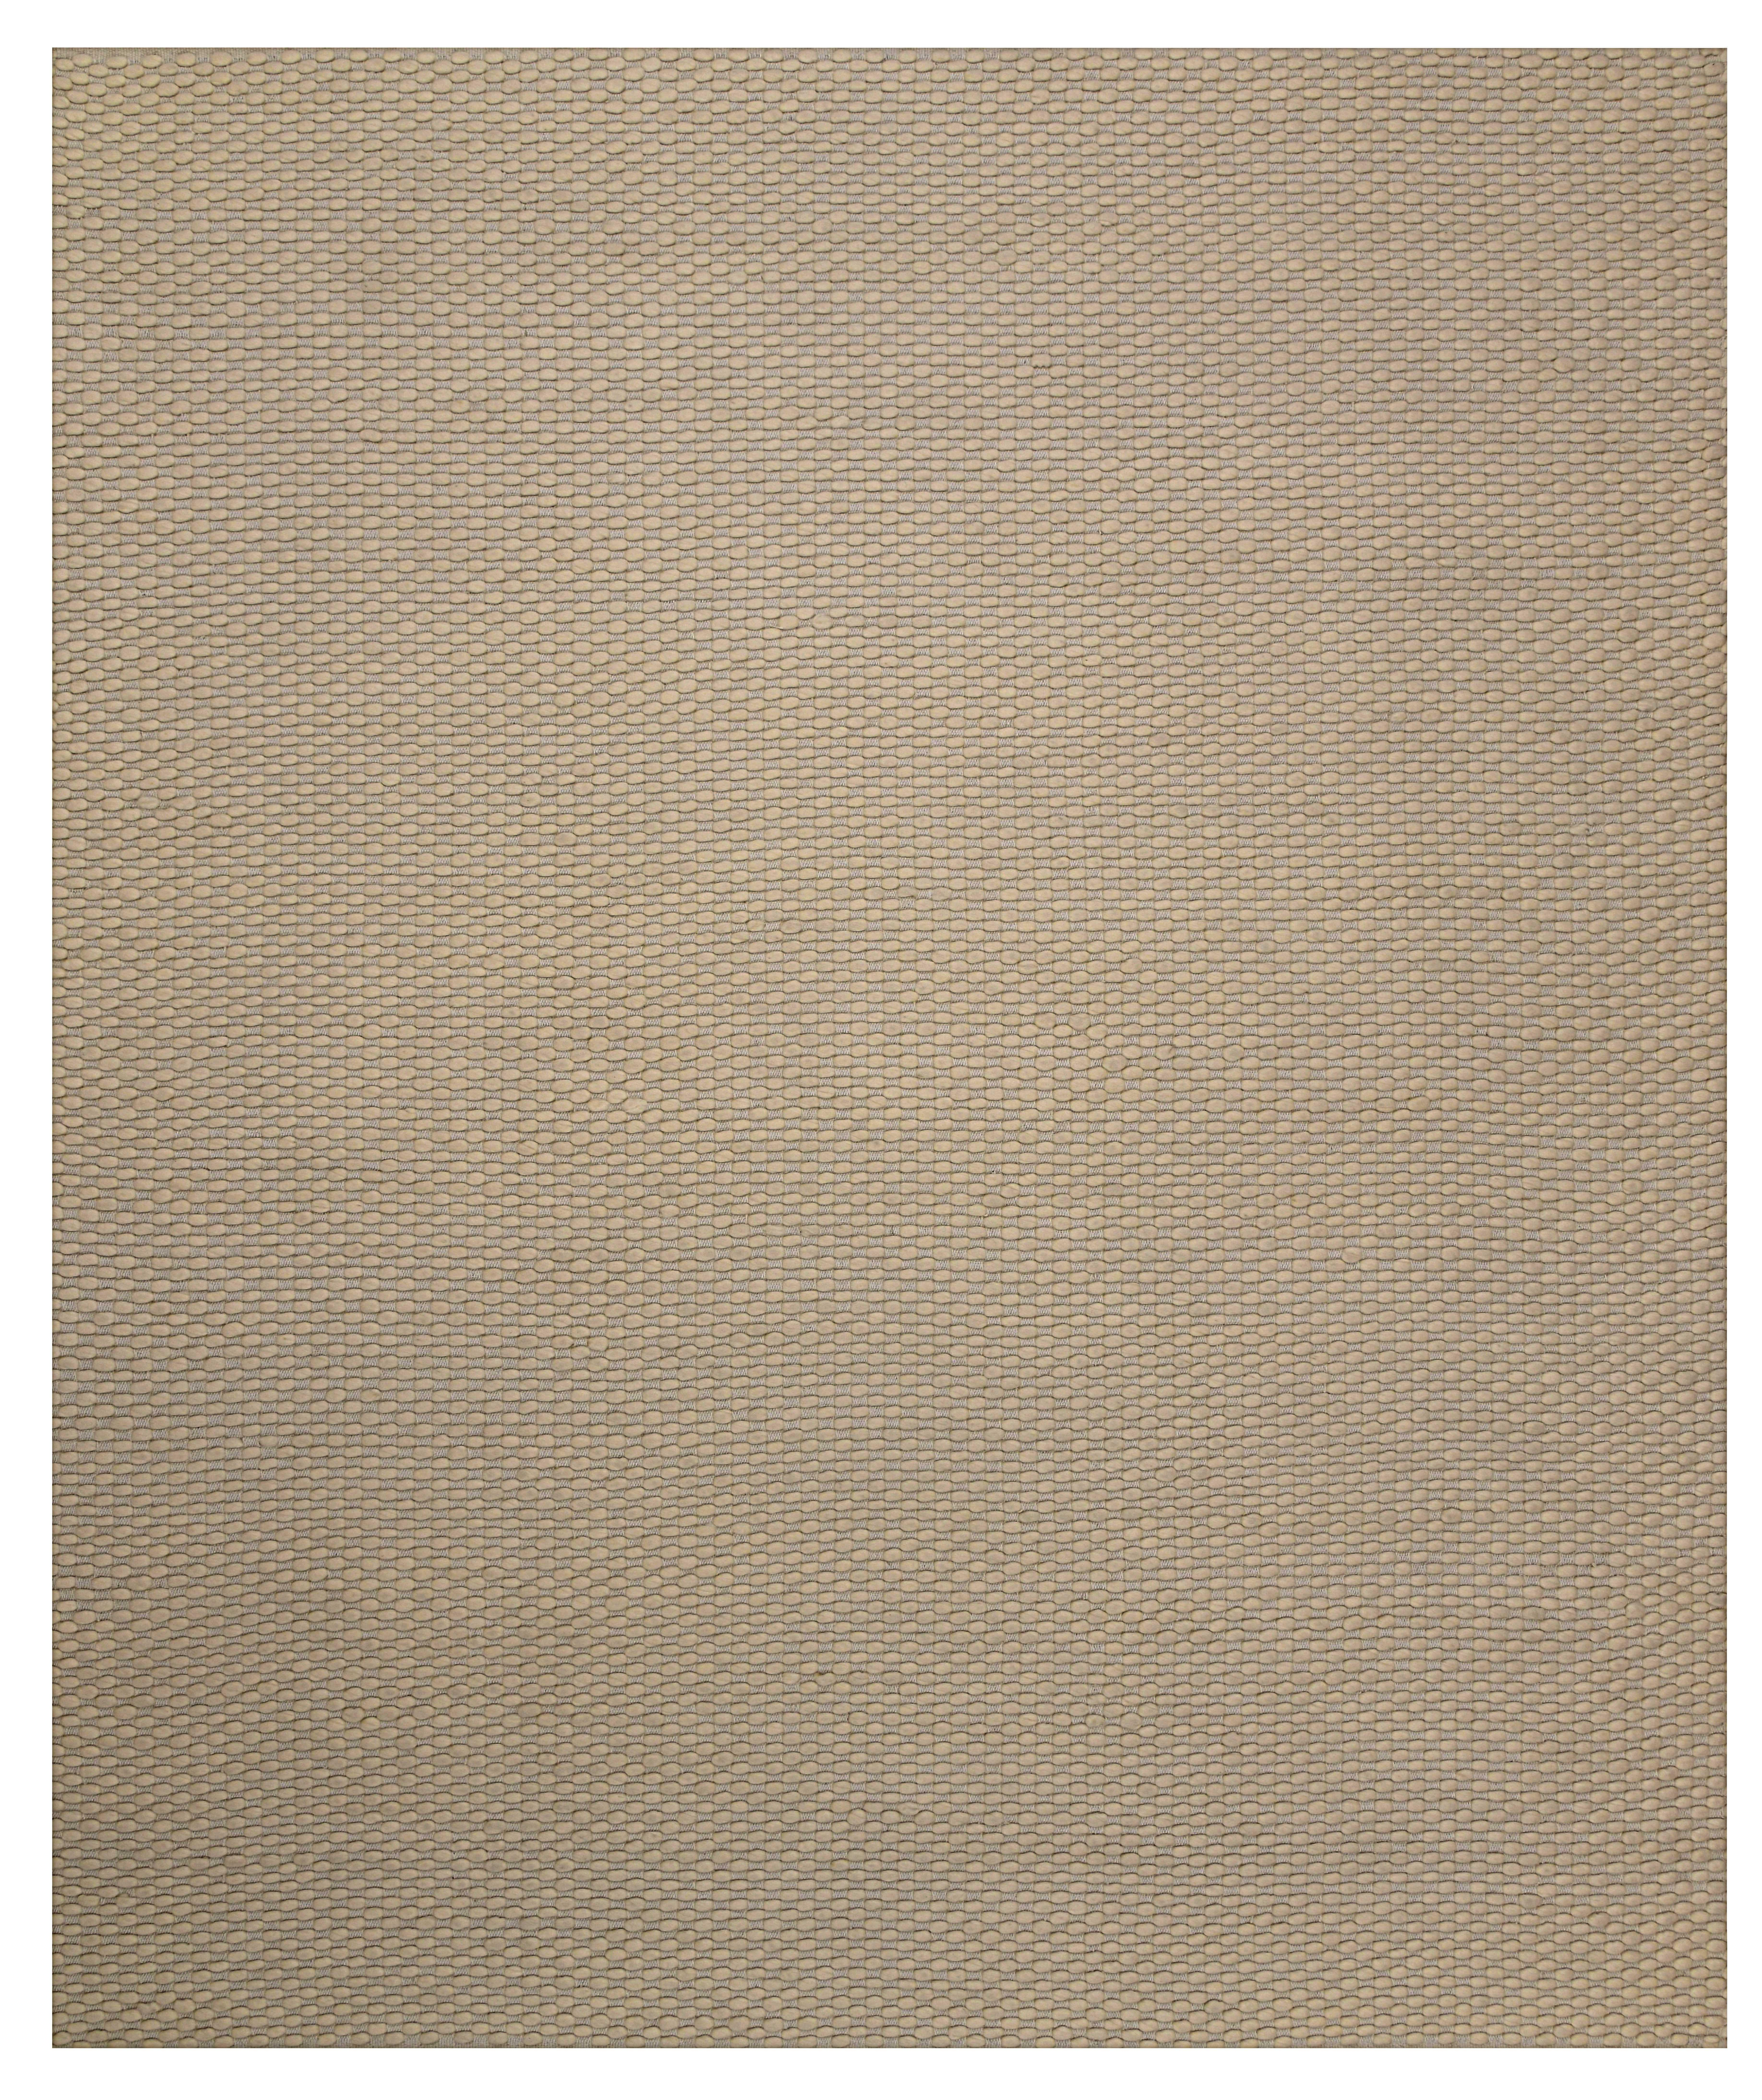 Indian Choma, Fawn, Handwoven Face 72% Undyed New Zealand Wool/28% Cotton, 9' x 12' For Sale